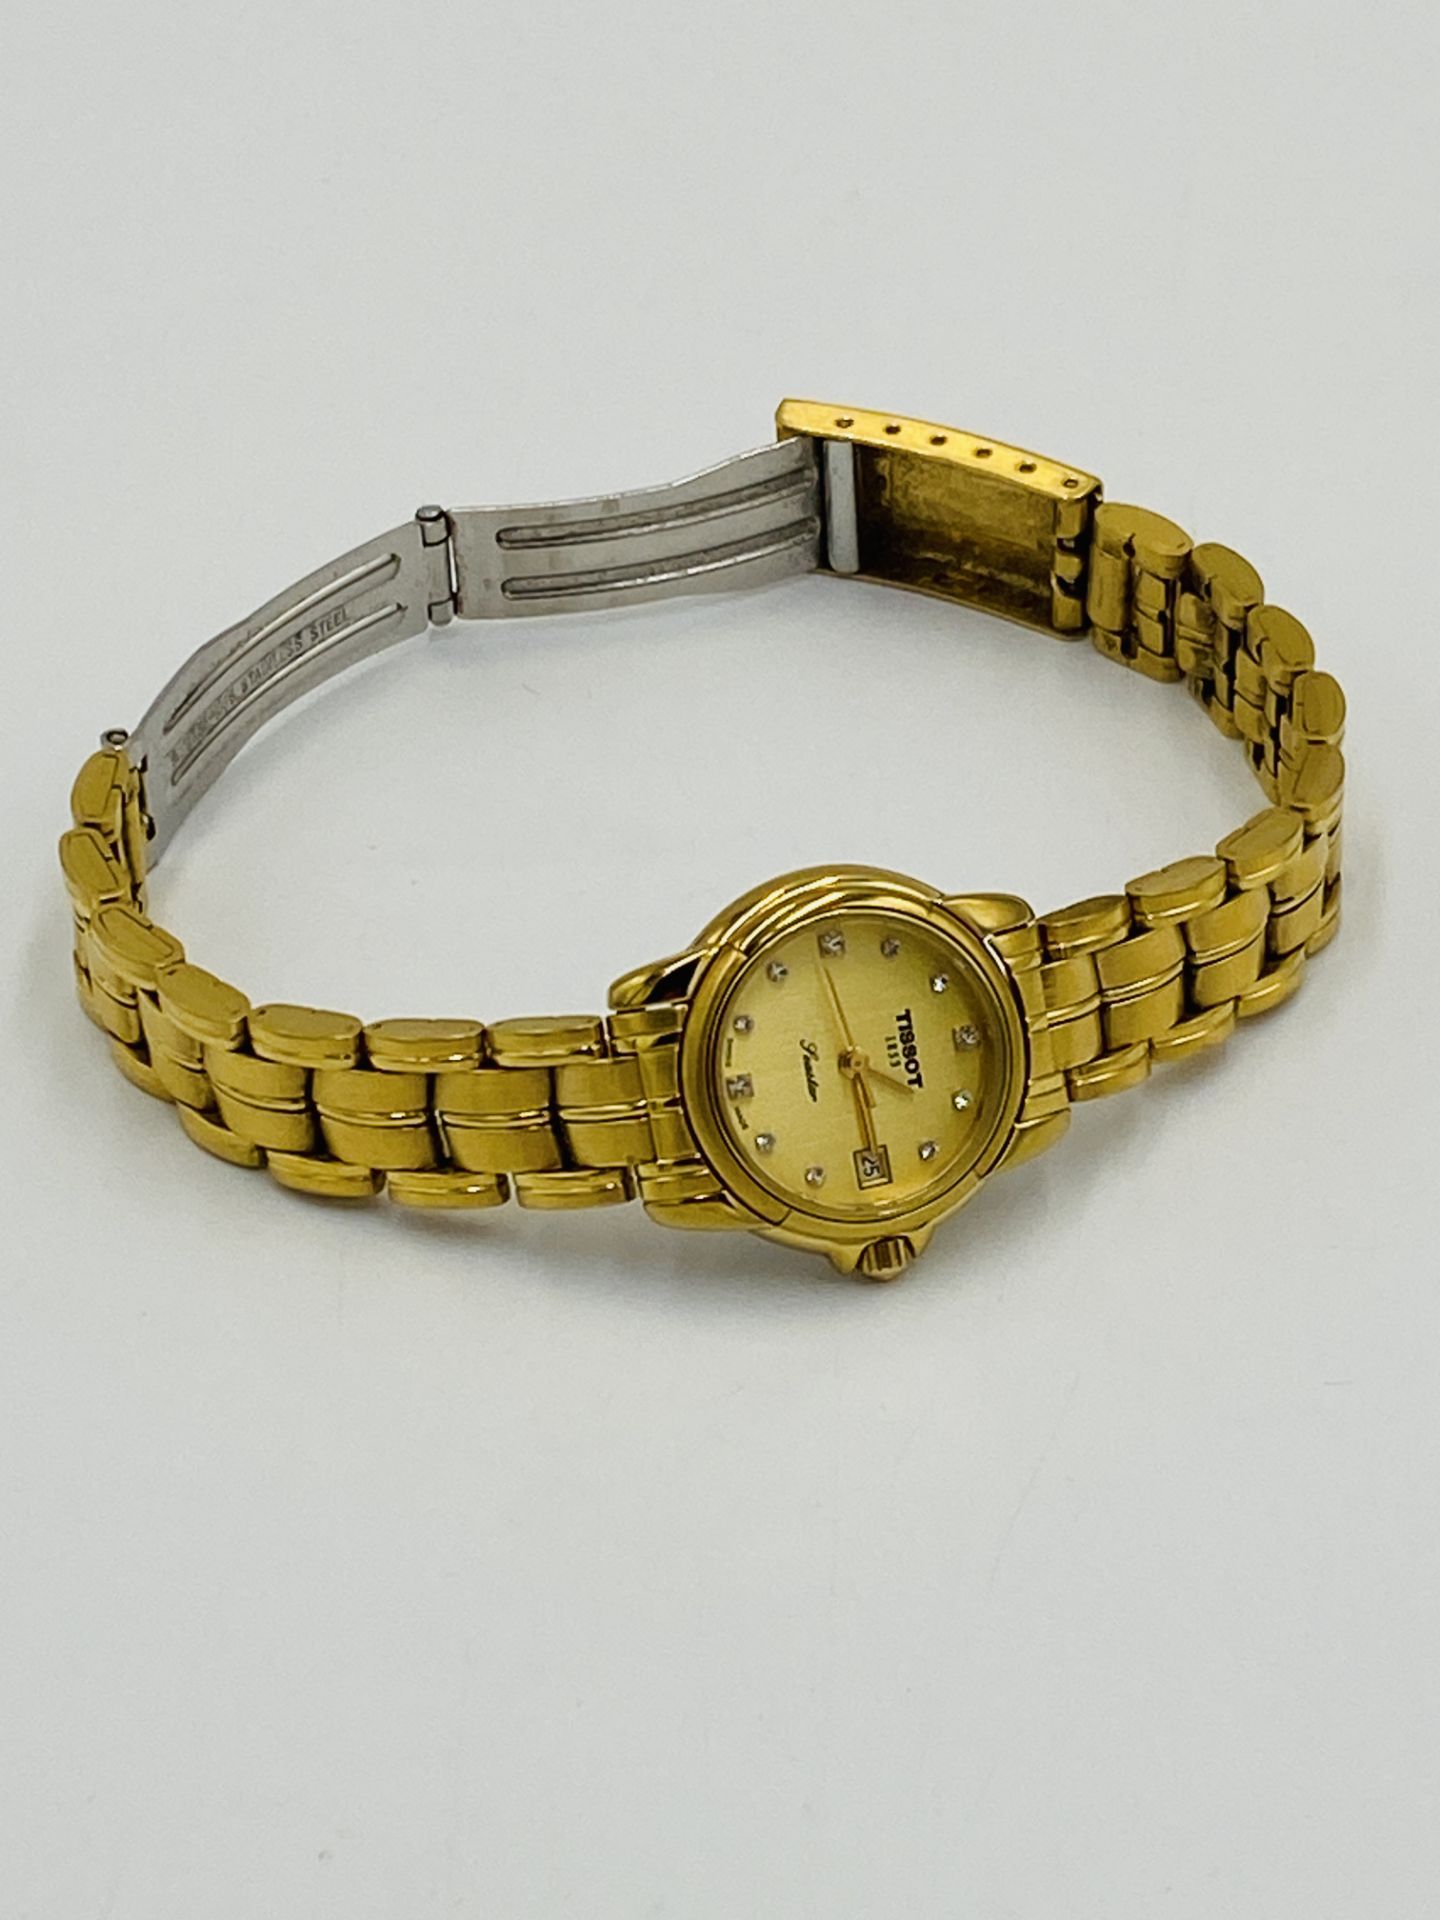 Tissot gold plated ladies watch - Image 2 of 5